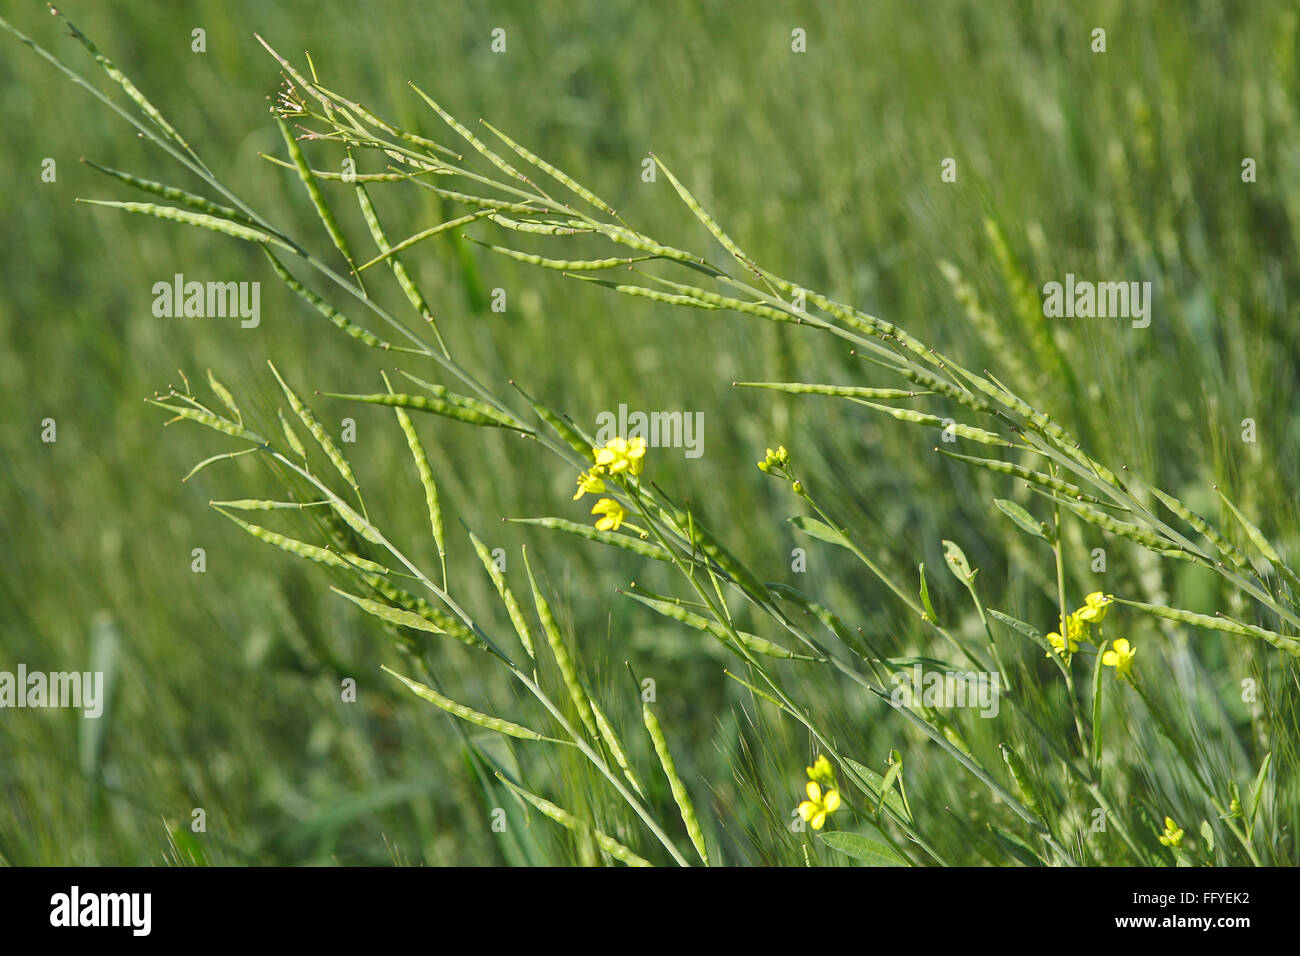 Spices ; green mustard plants with yellow flower brassica campestris syn in field ; Jabalpur ; Madhya Pradesh ; India Stock Photo